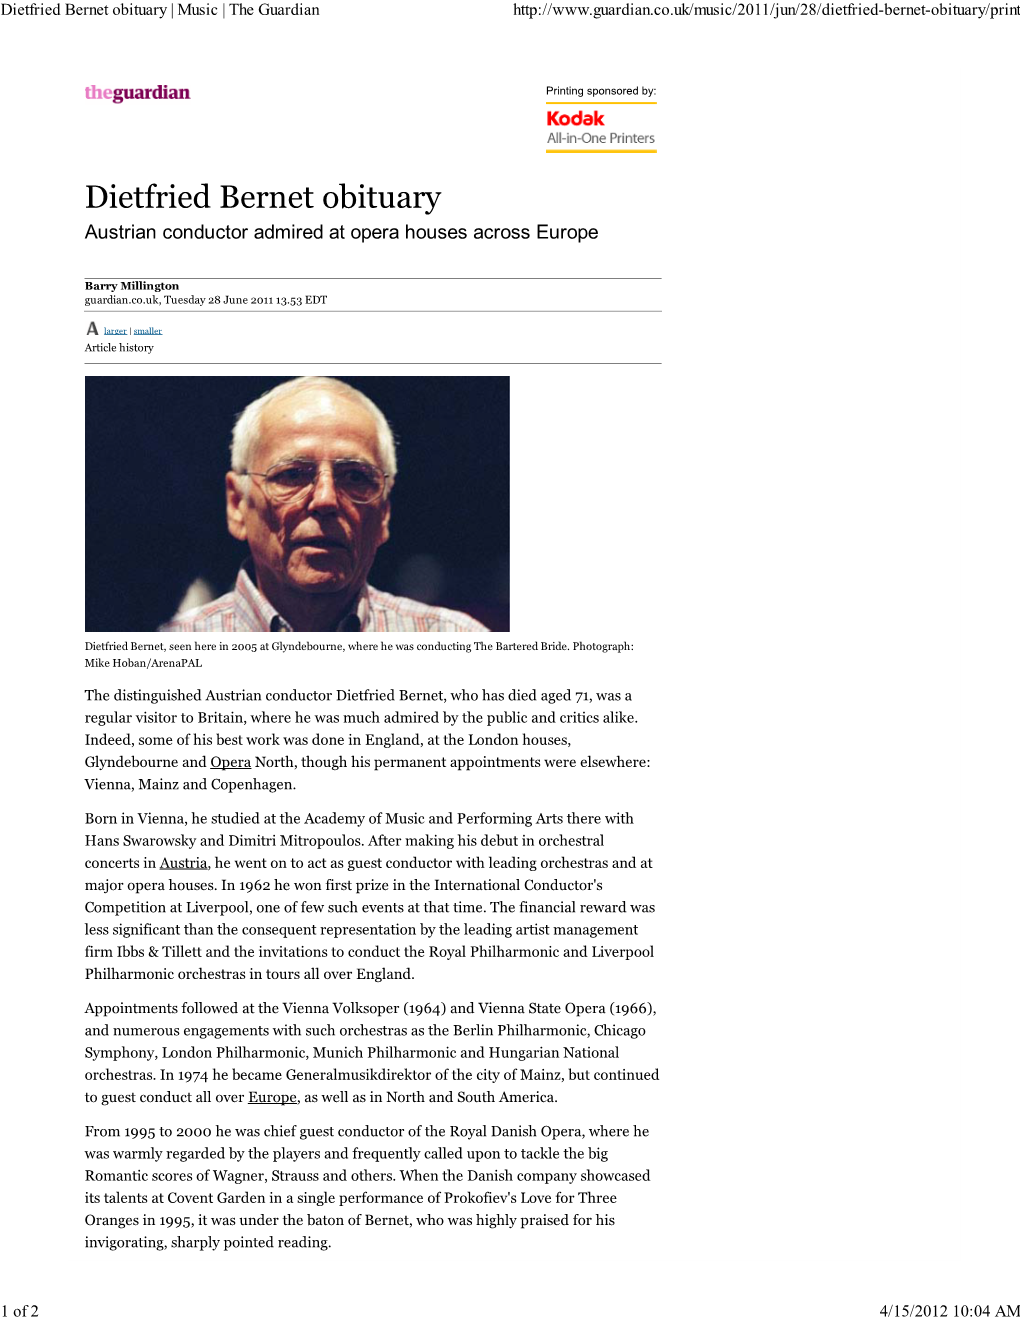 Dietfried Bernet Obituary | Music | the Guardian